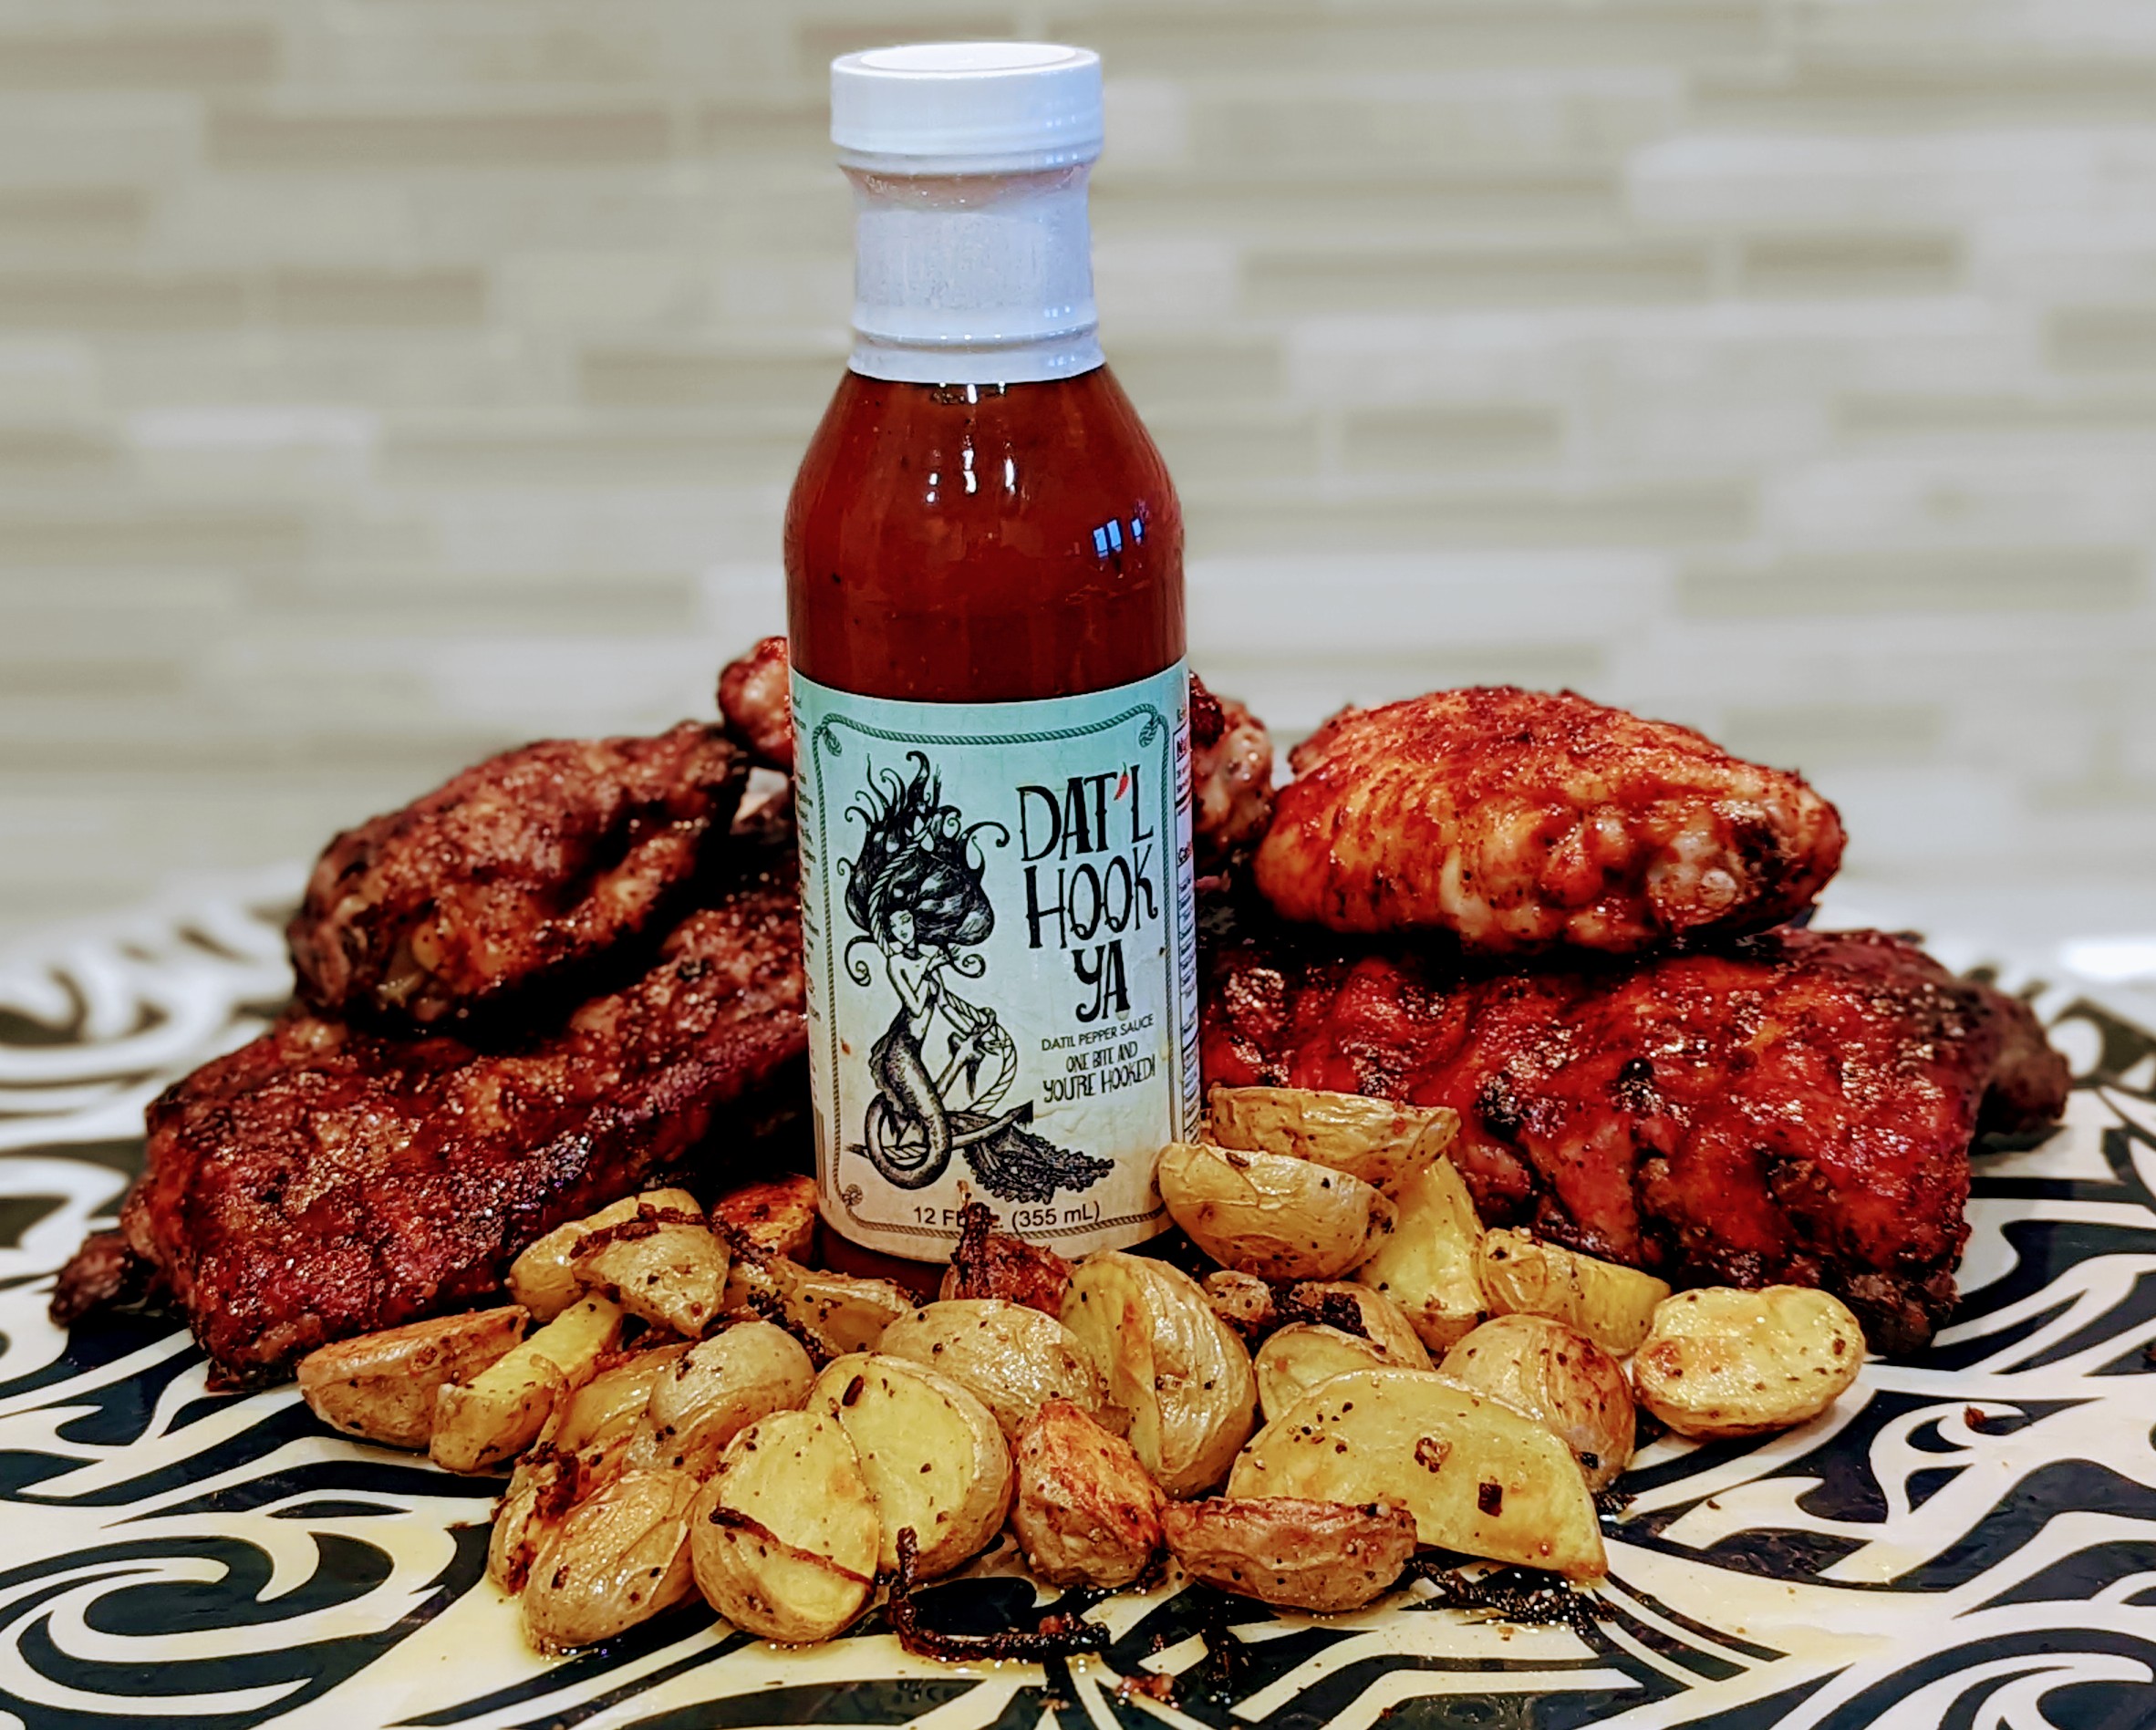 Datil pepper barbeque sauce made with Dat'l Hook Ya